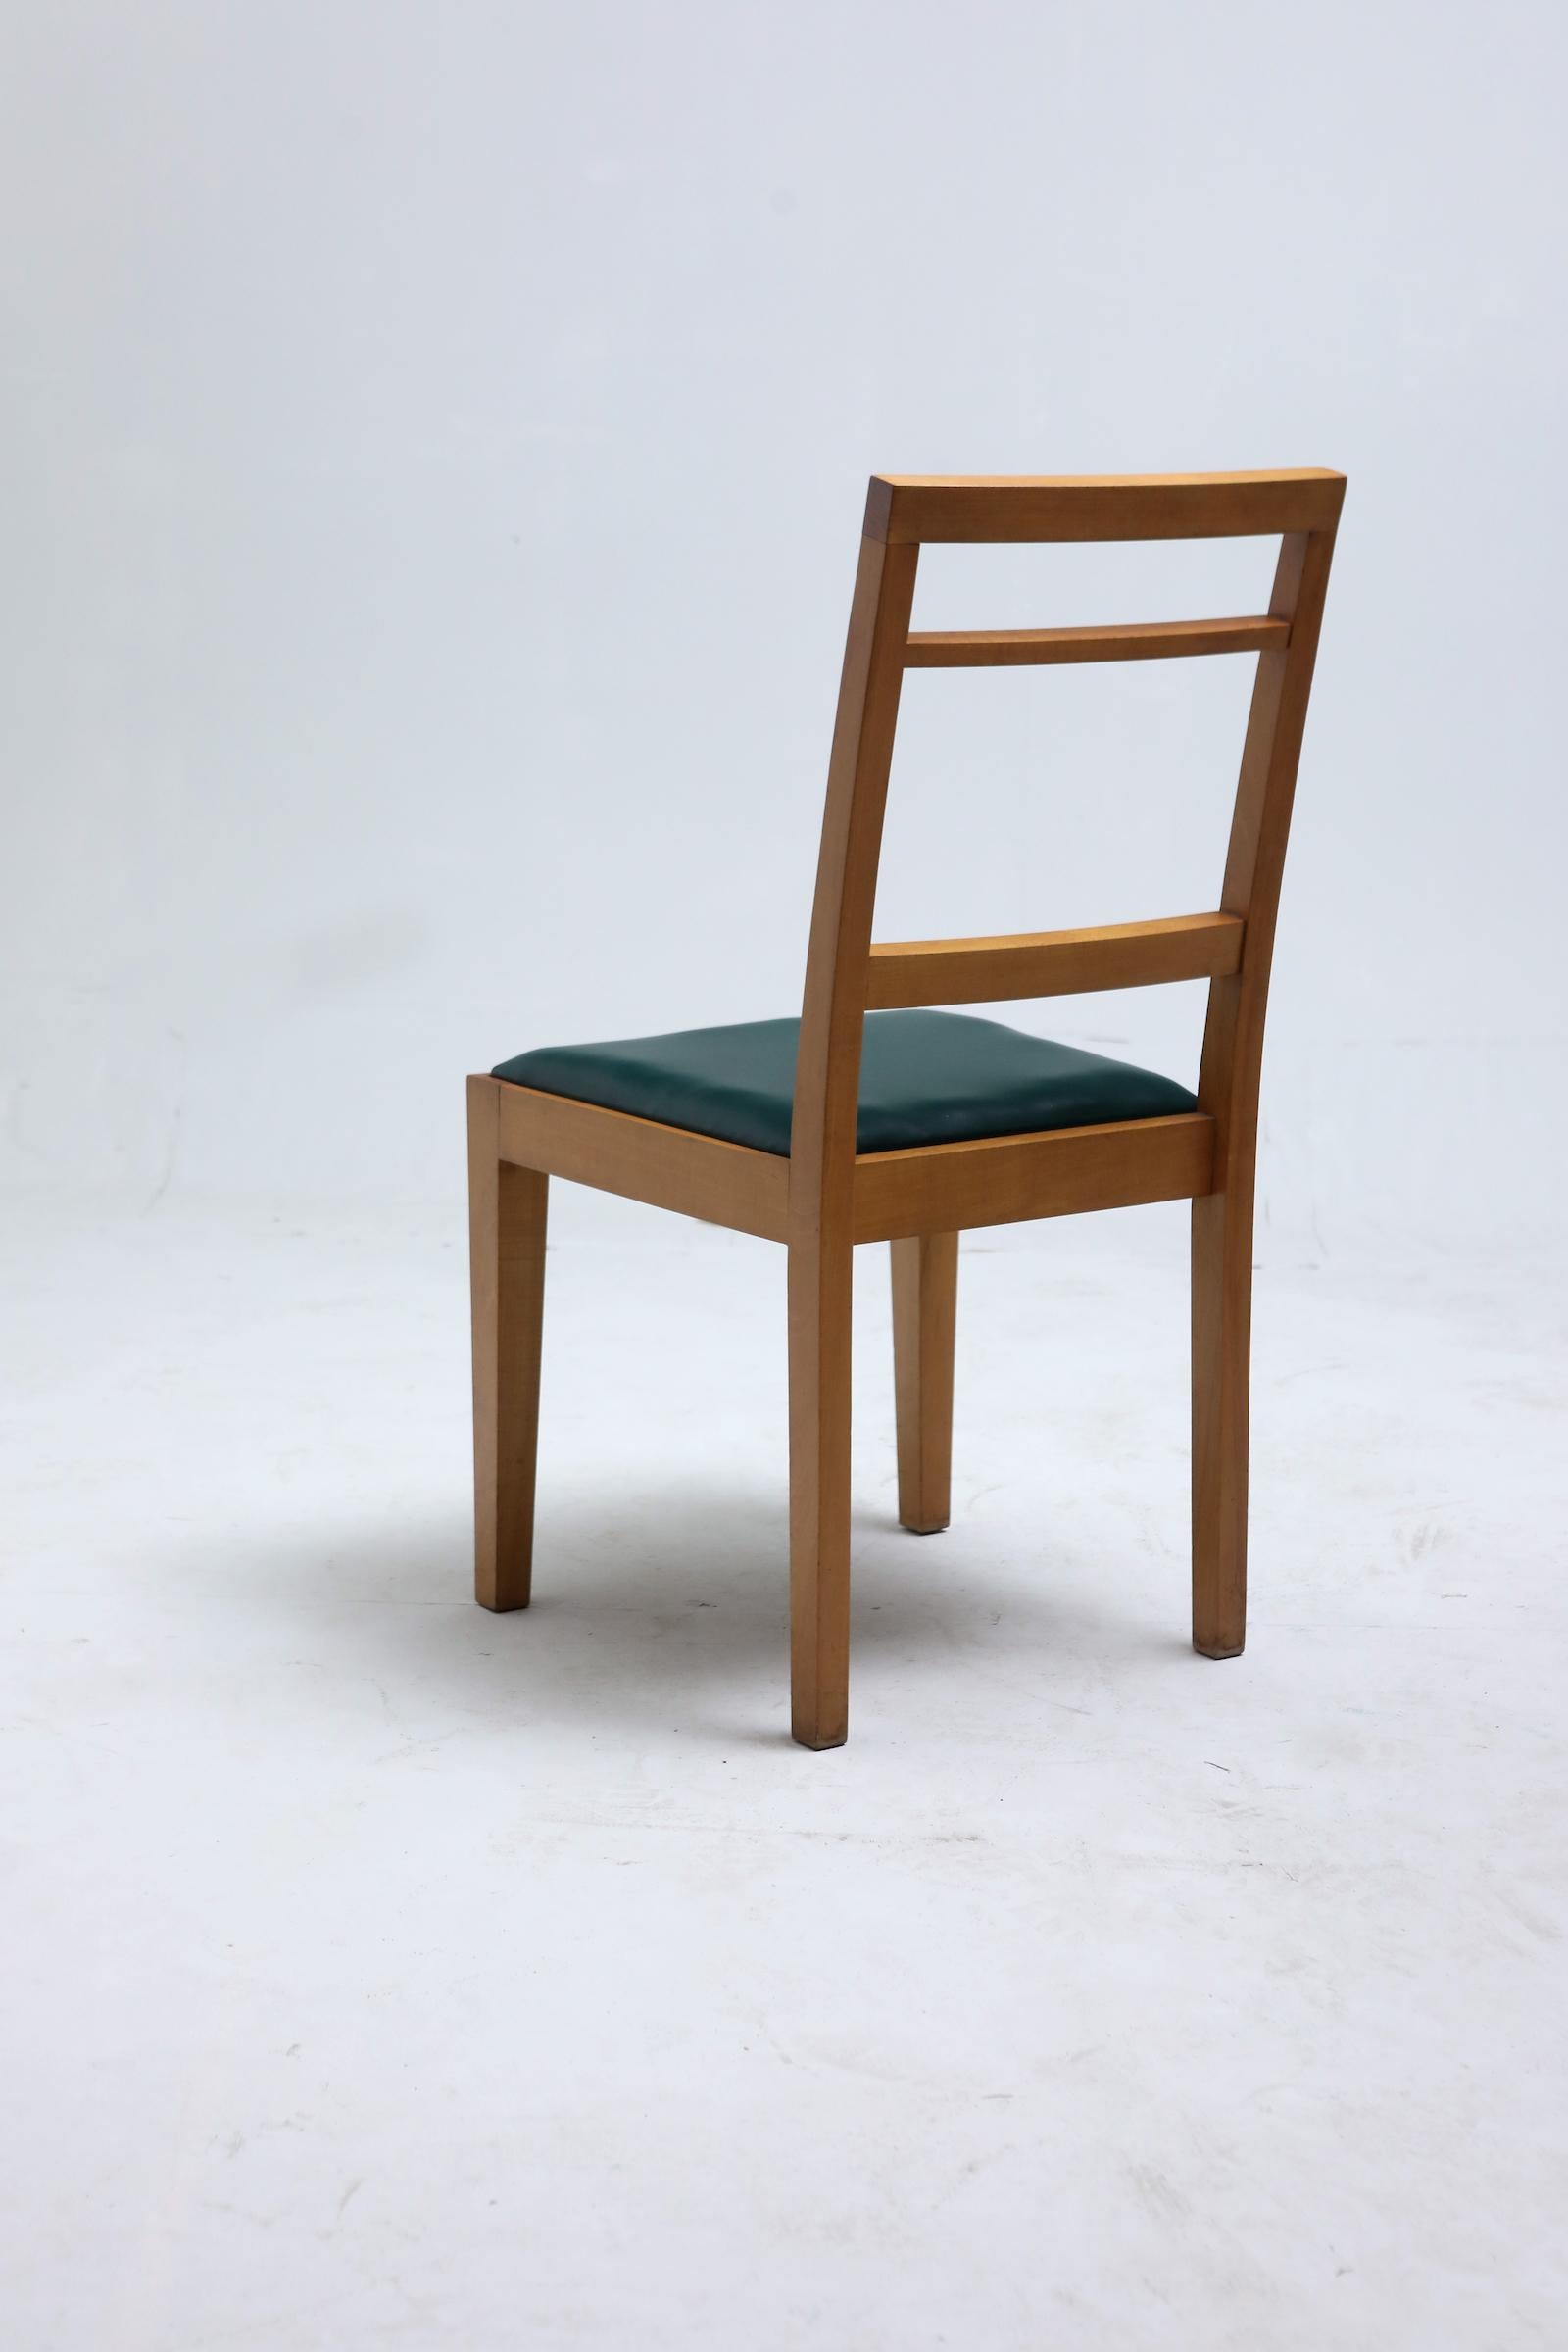 Woodwork Mid-Century Modern Set of 8 Chairs in Wood and Leather, Brazil 1960s For Sale